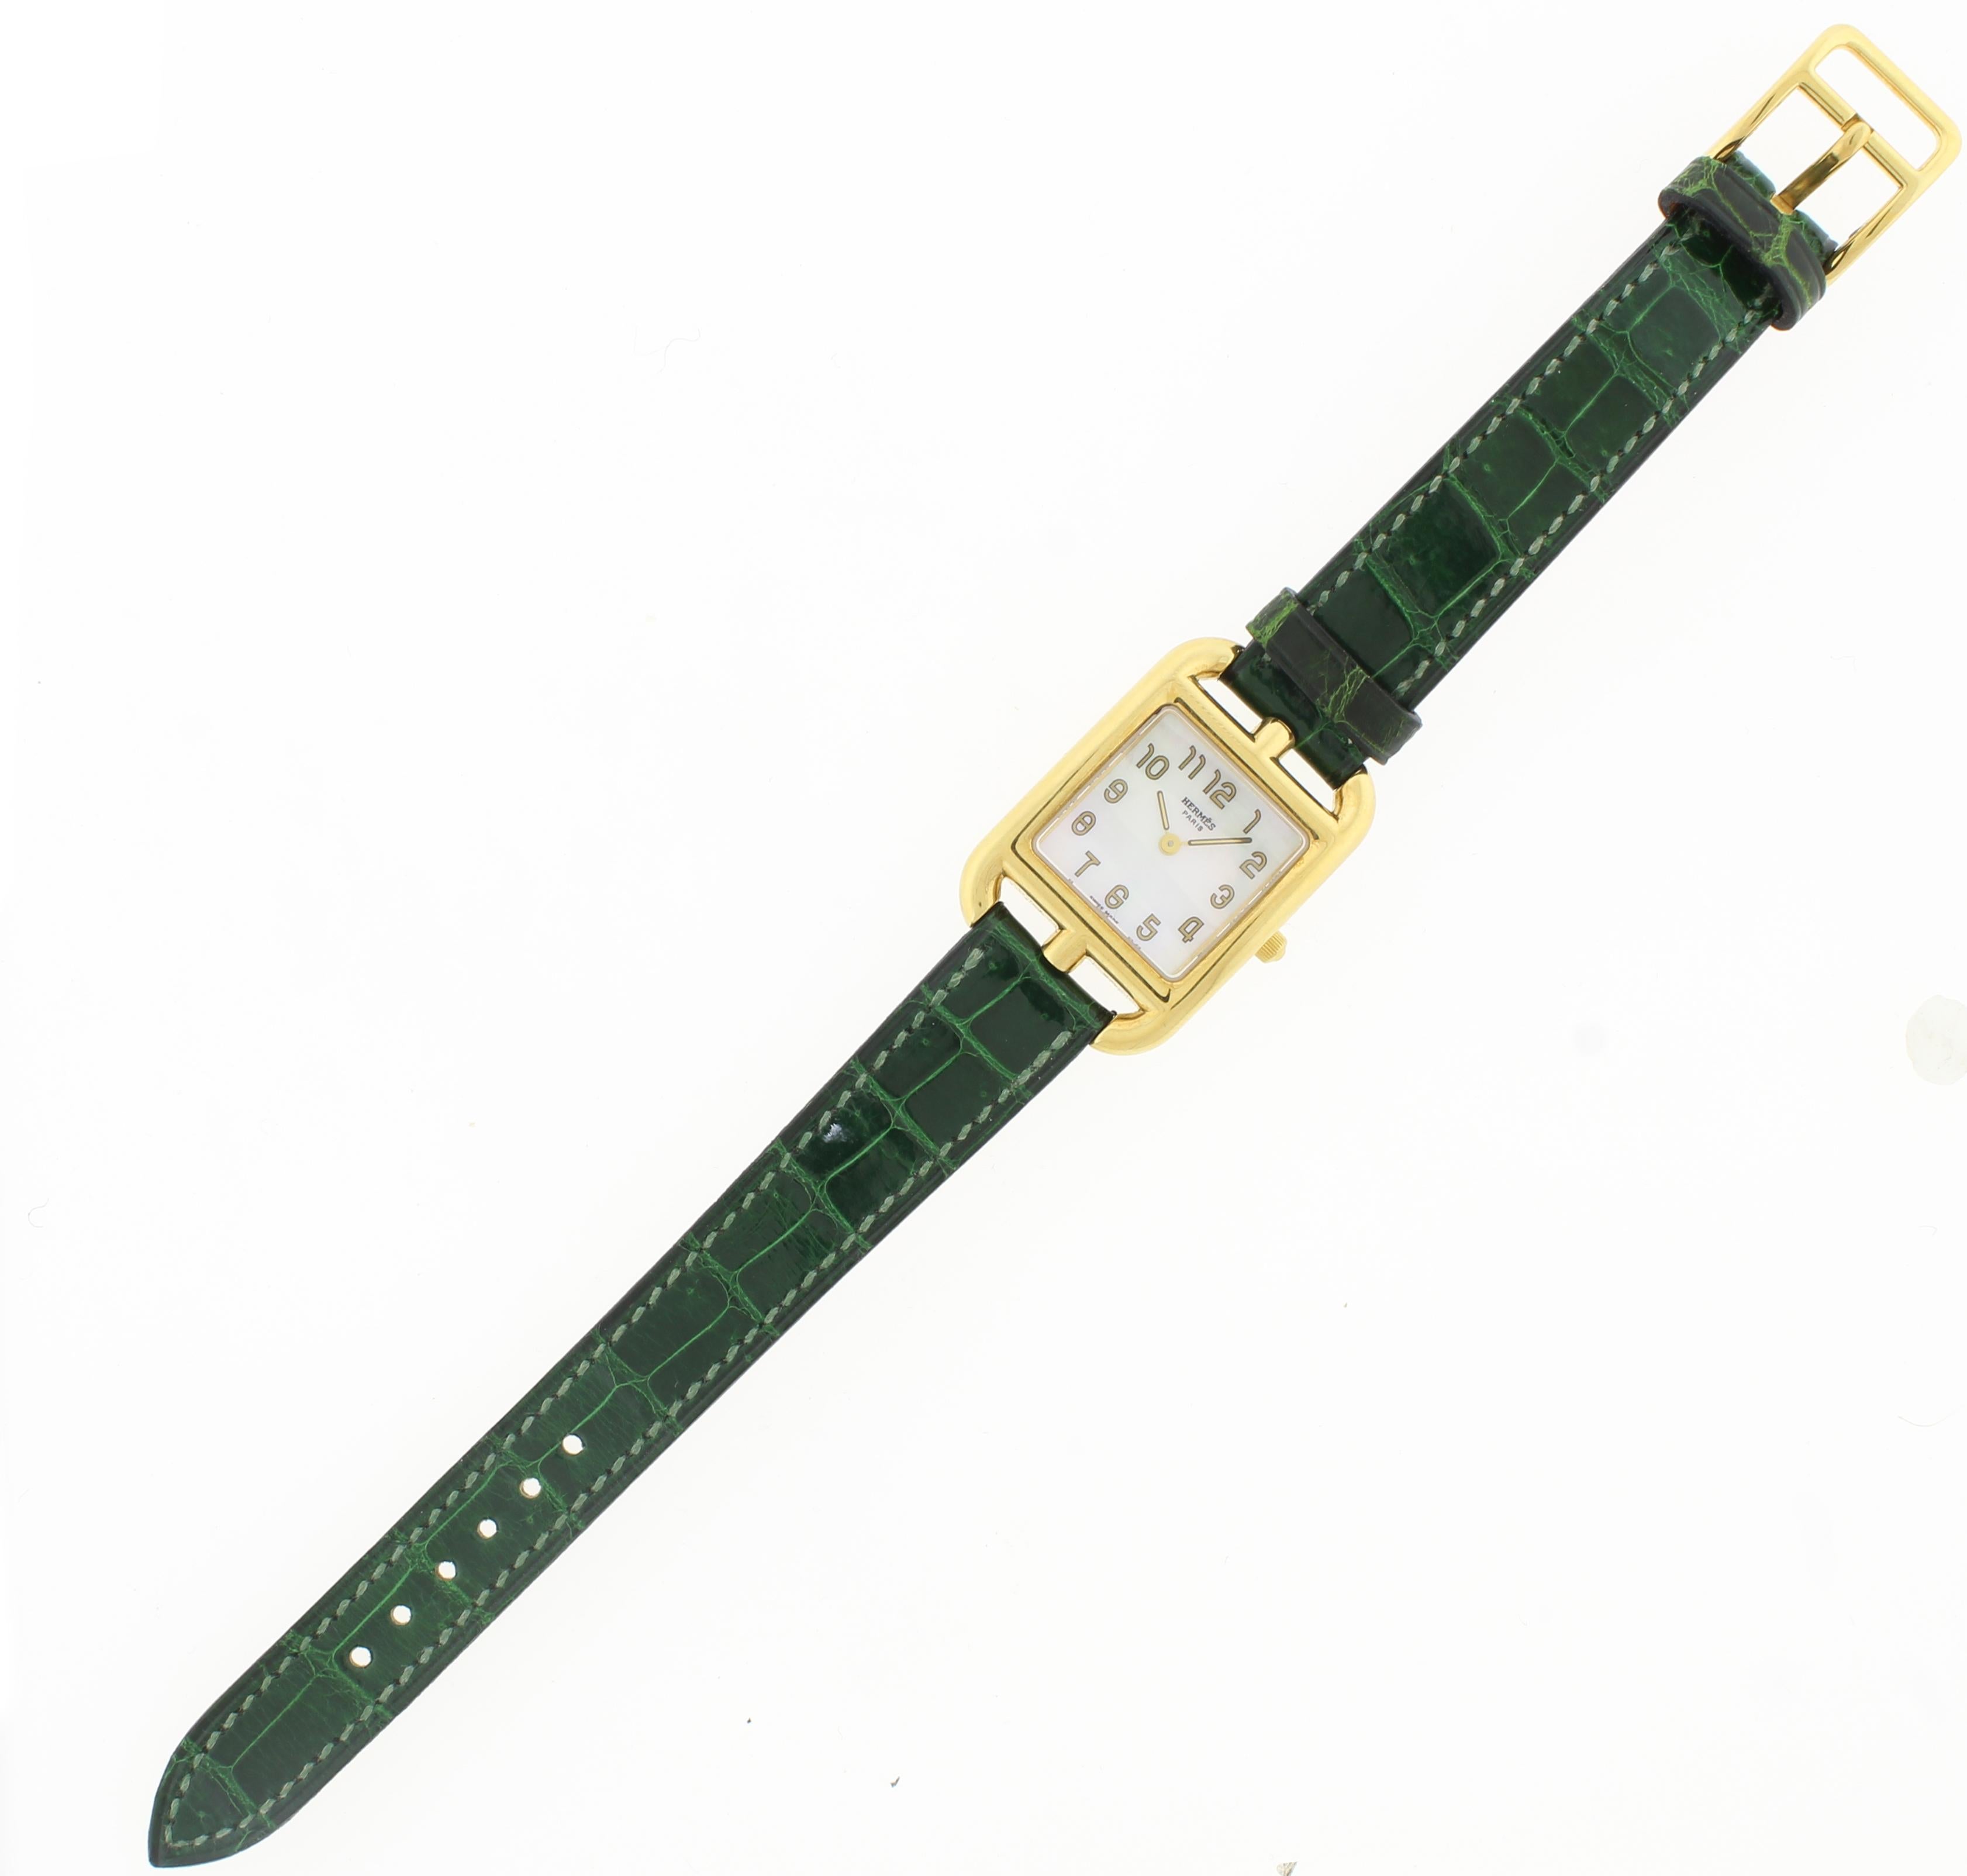 From Hermes, an elegant ladies wrist watch from their cape cod collection
♦ Designer: Hermes
♦  18 karat square case 23mm X 23mm
♦ Smooth green alligator strap with 18 karat yellow gold tang/pin buckle
♦ Solid screwed-in case back adorned with the